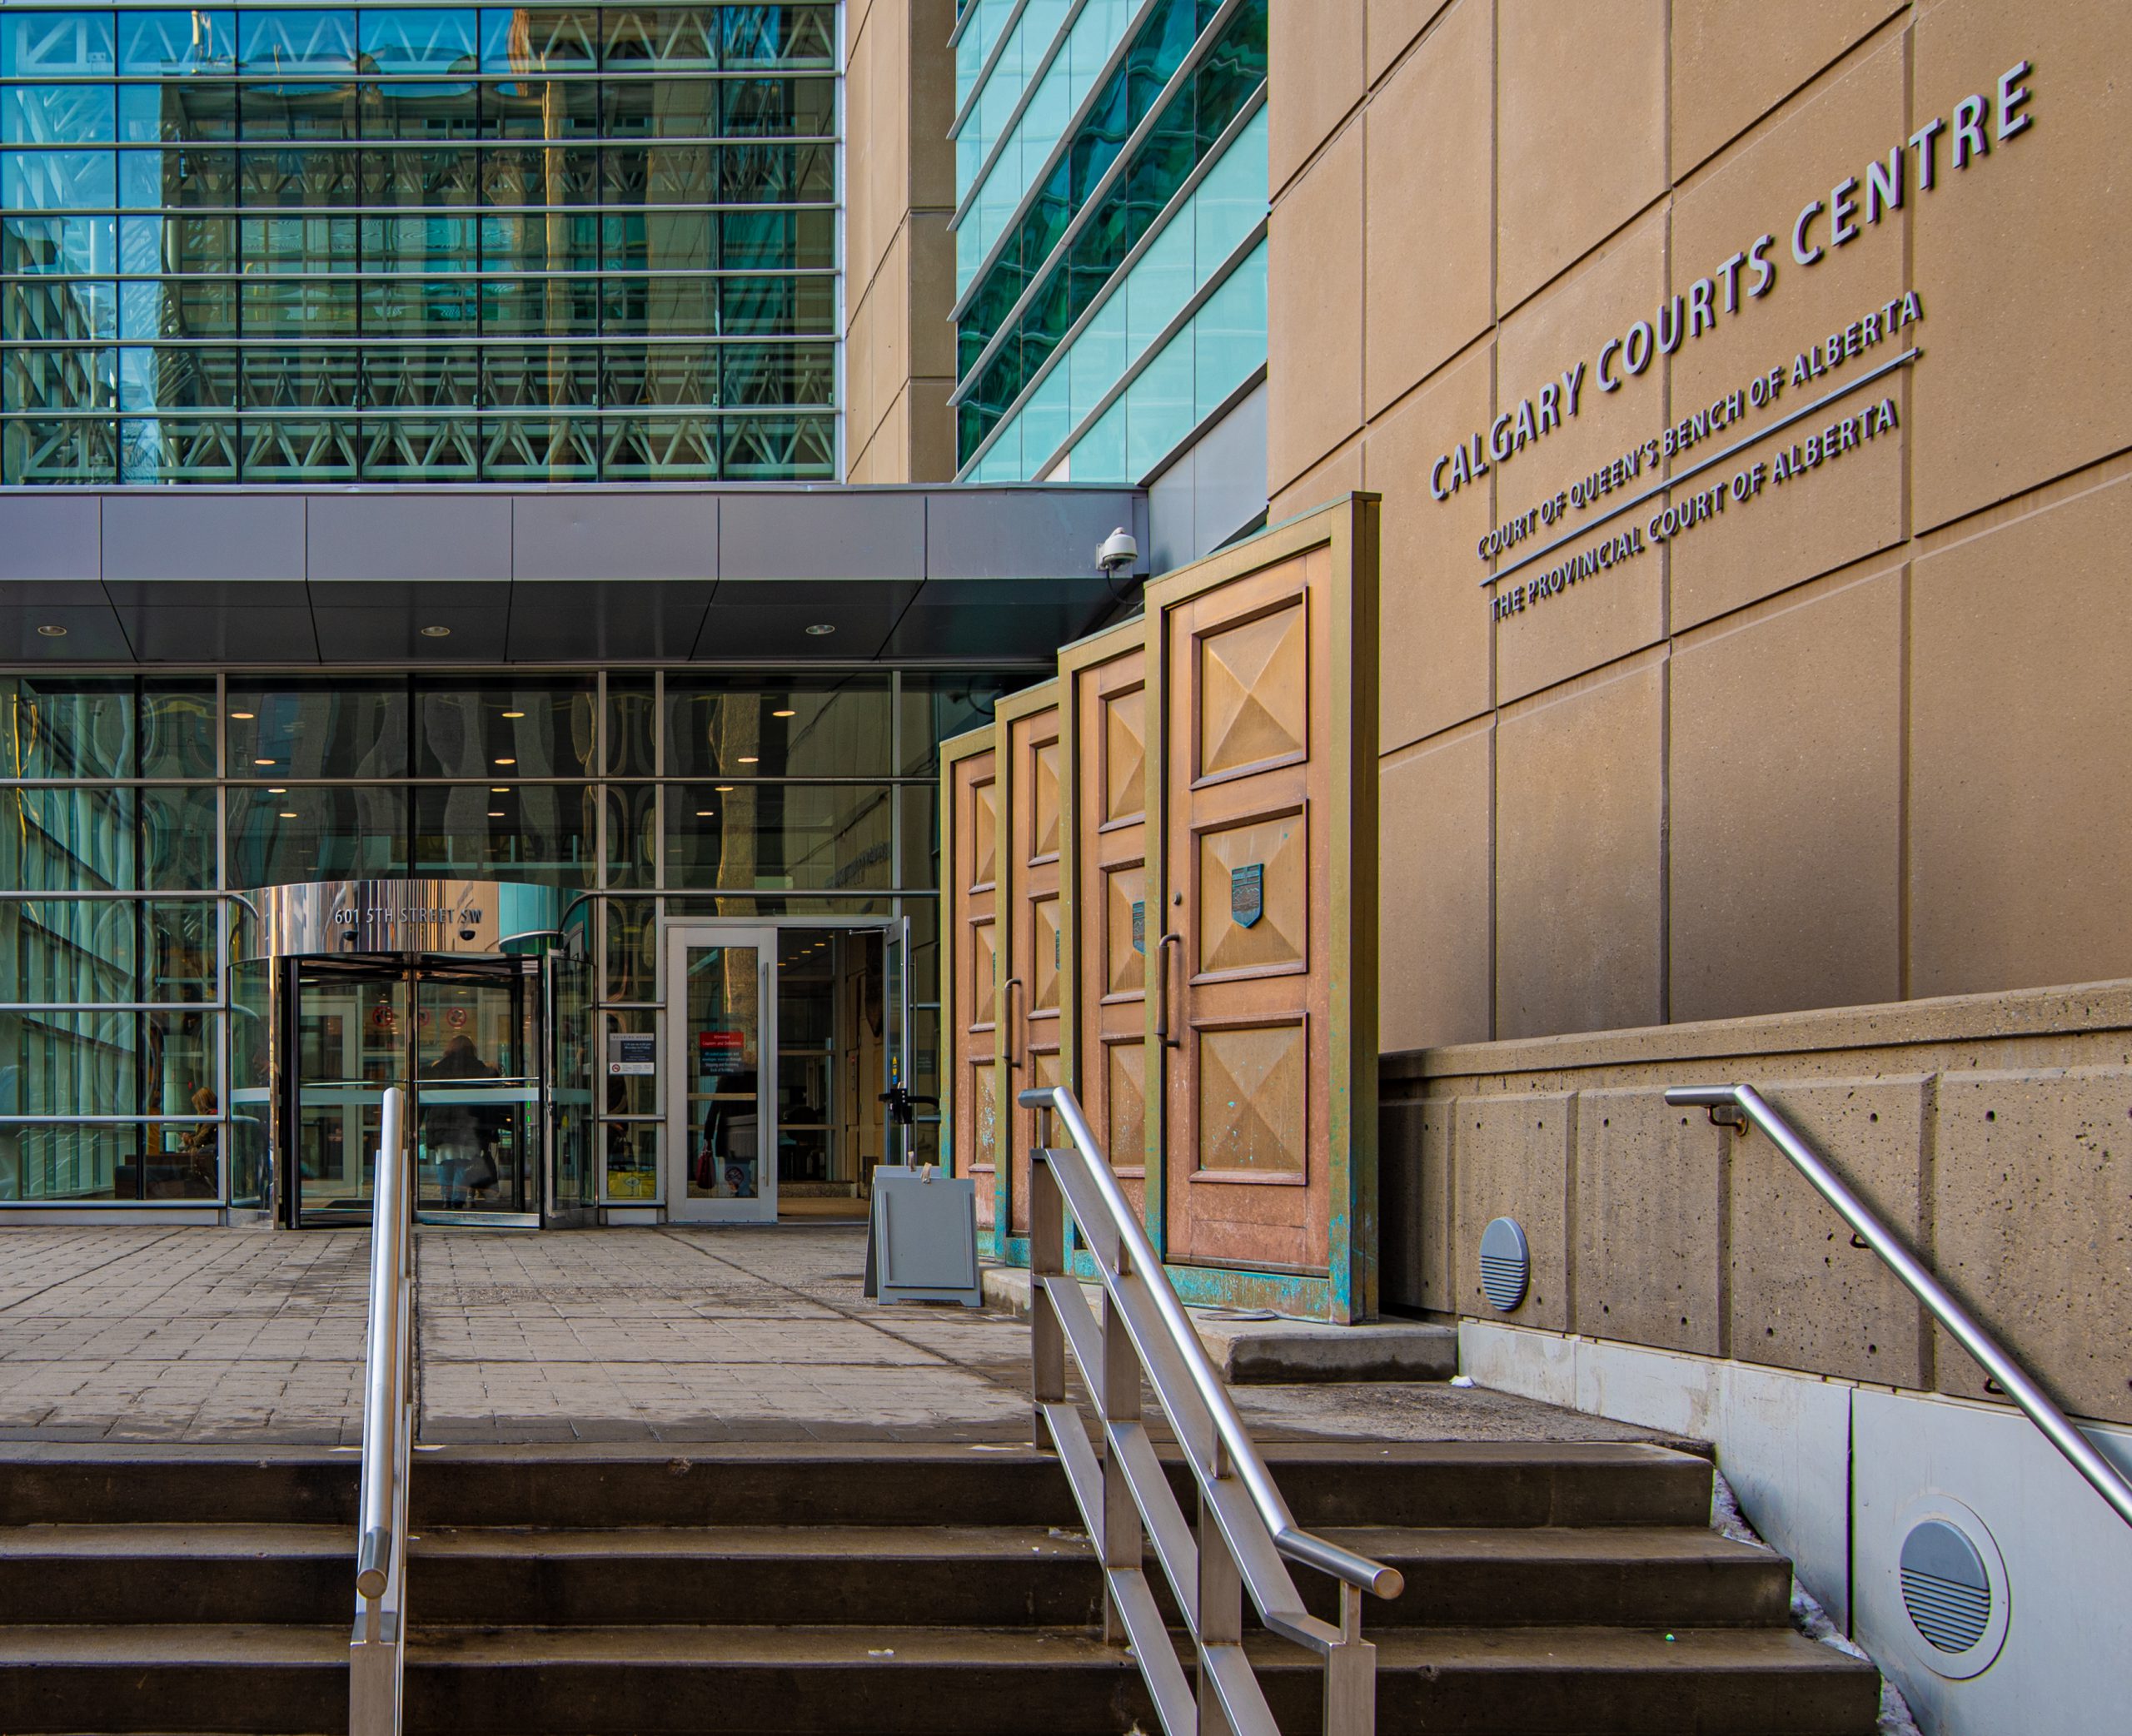 Stairs and main entrance to the Calgary Court Centre